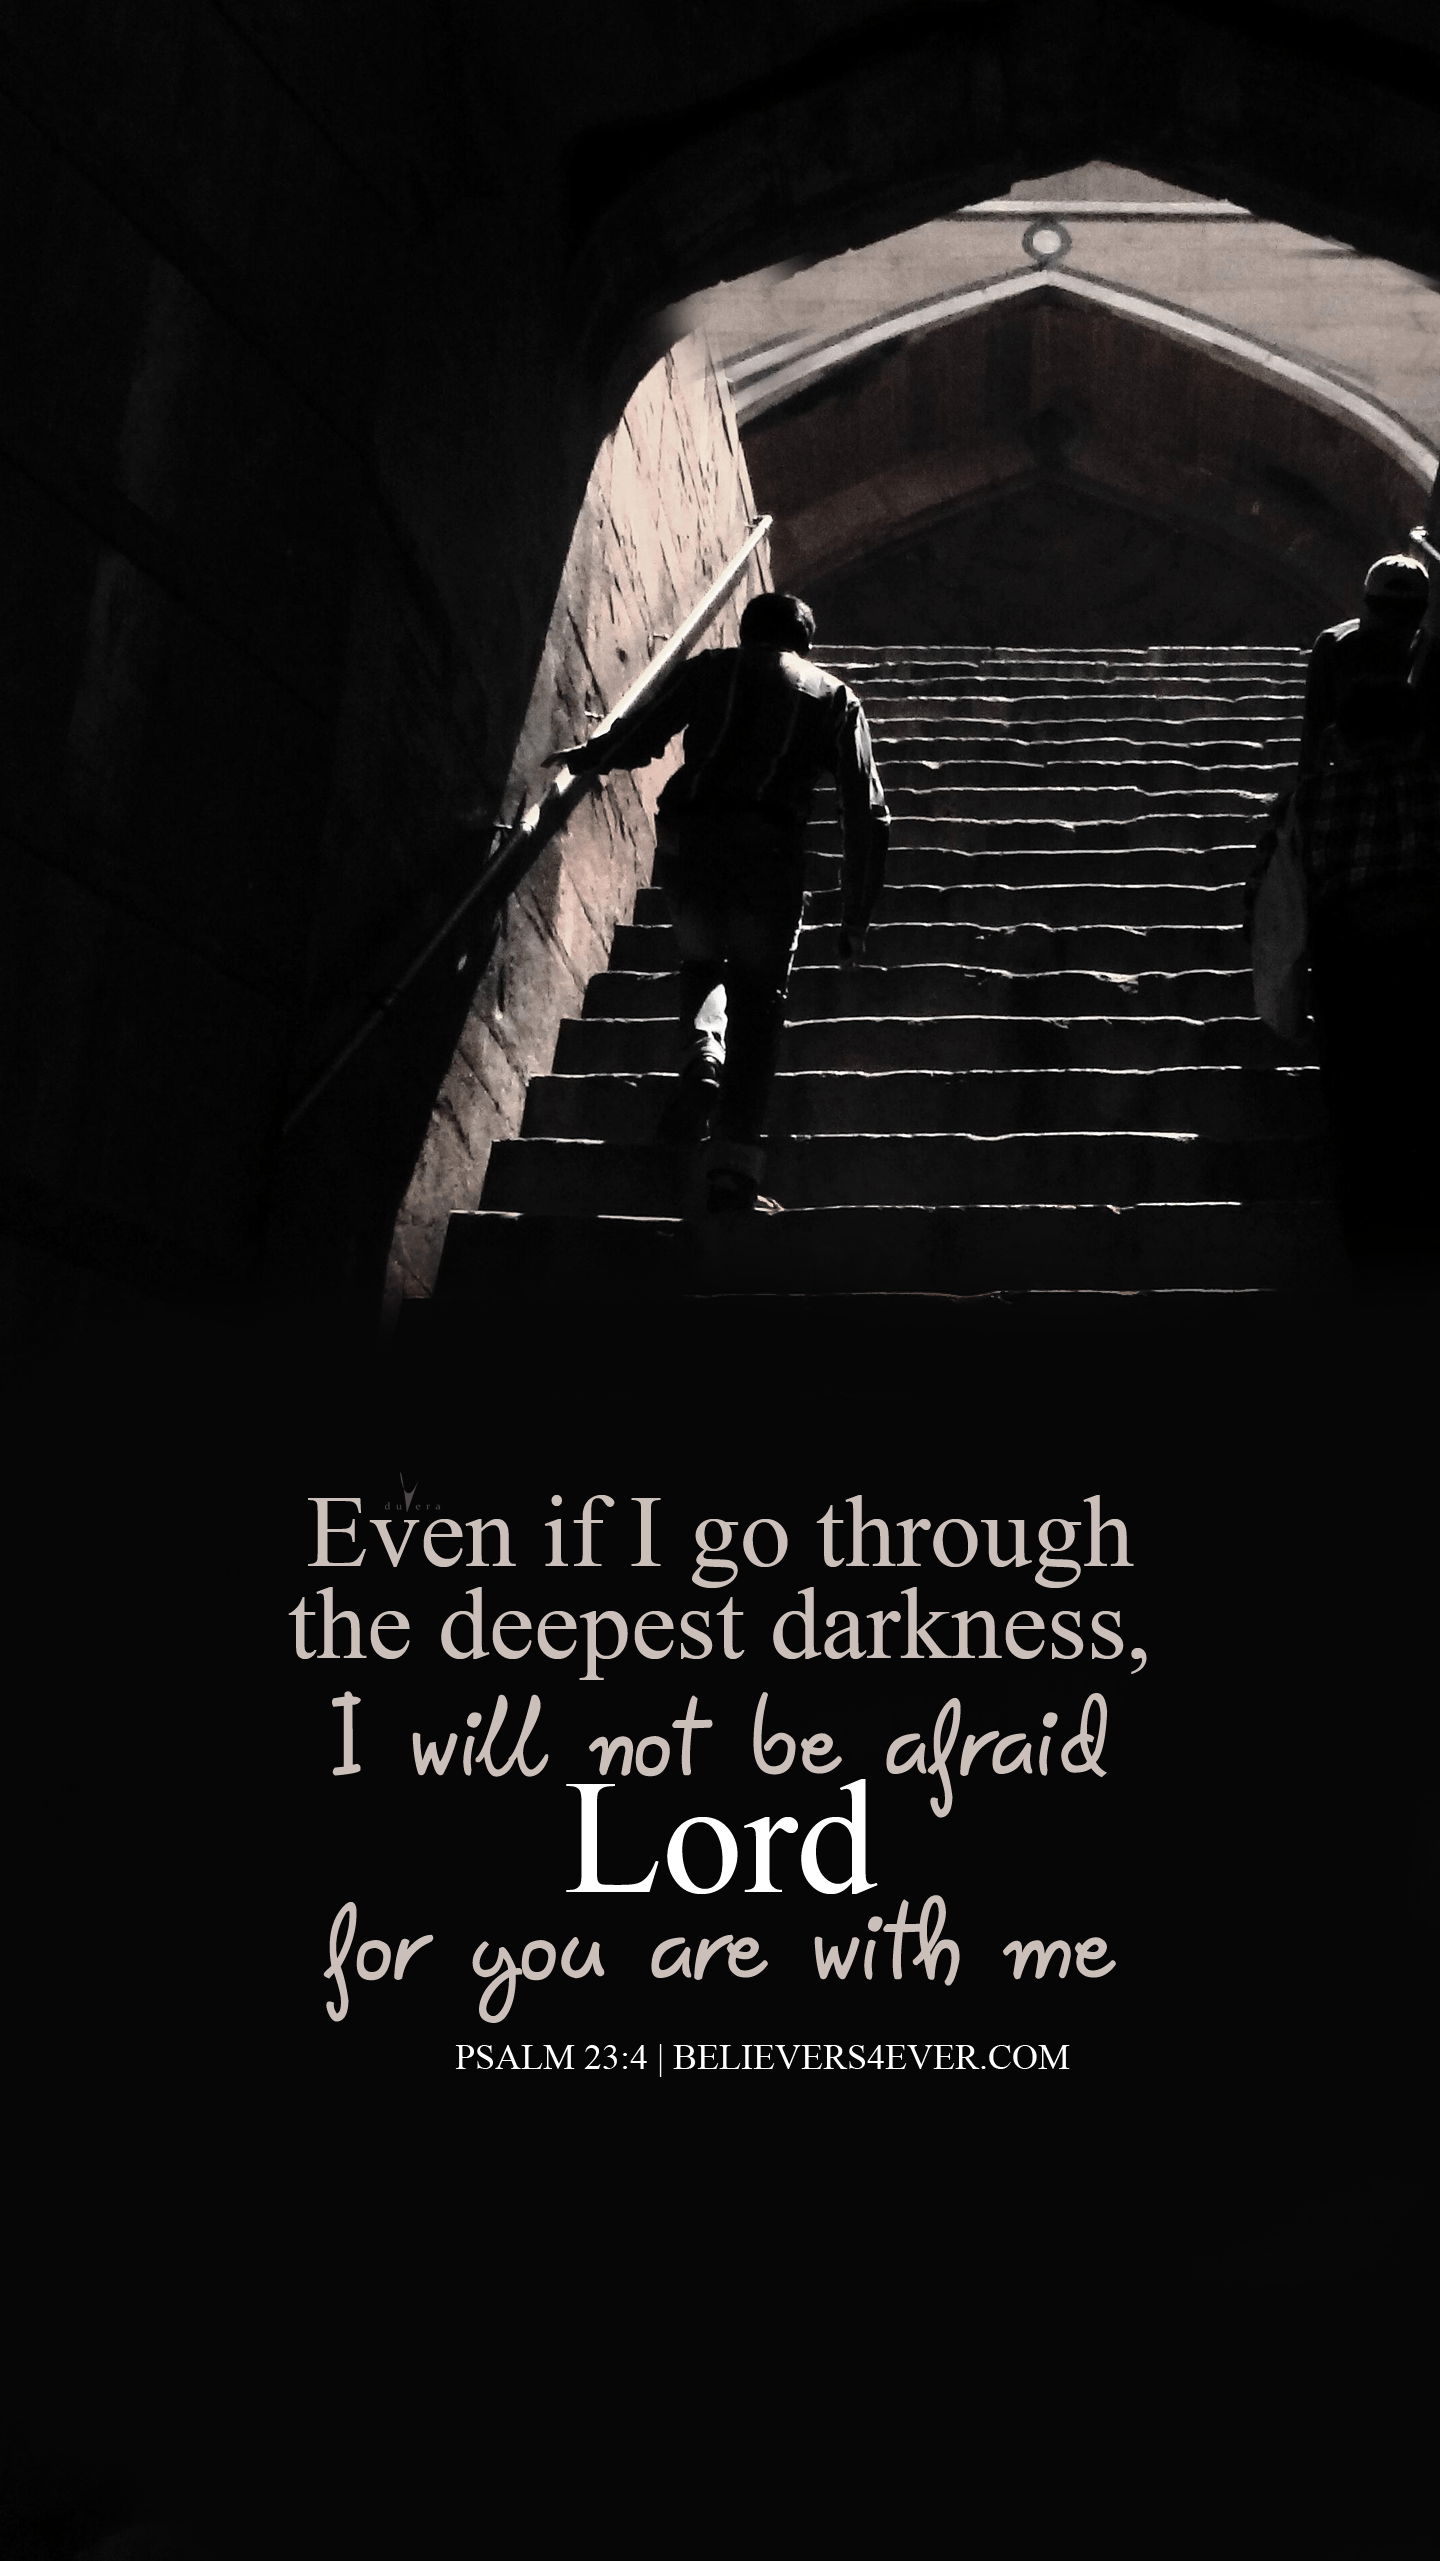 The deepest darkness. Psalm Mobile wallpaper